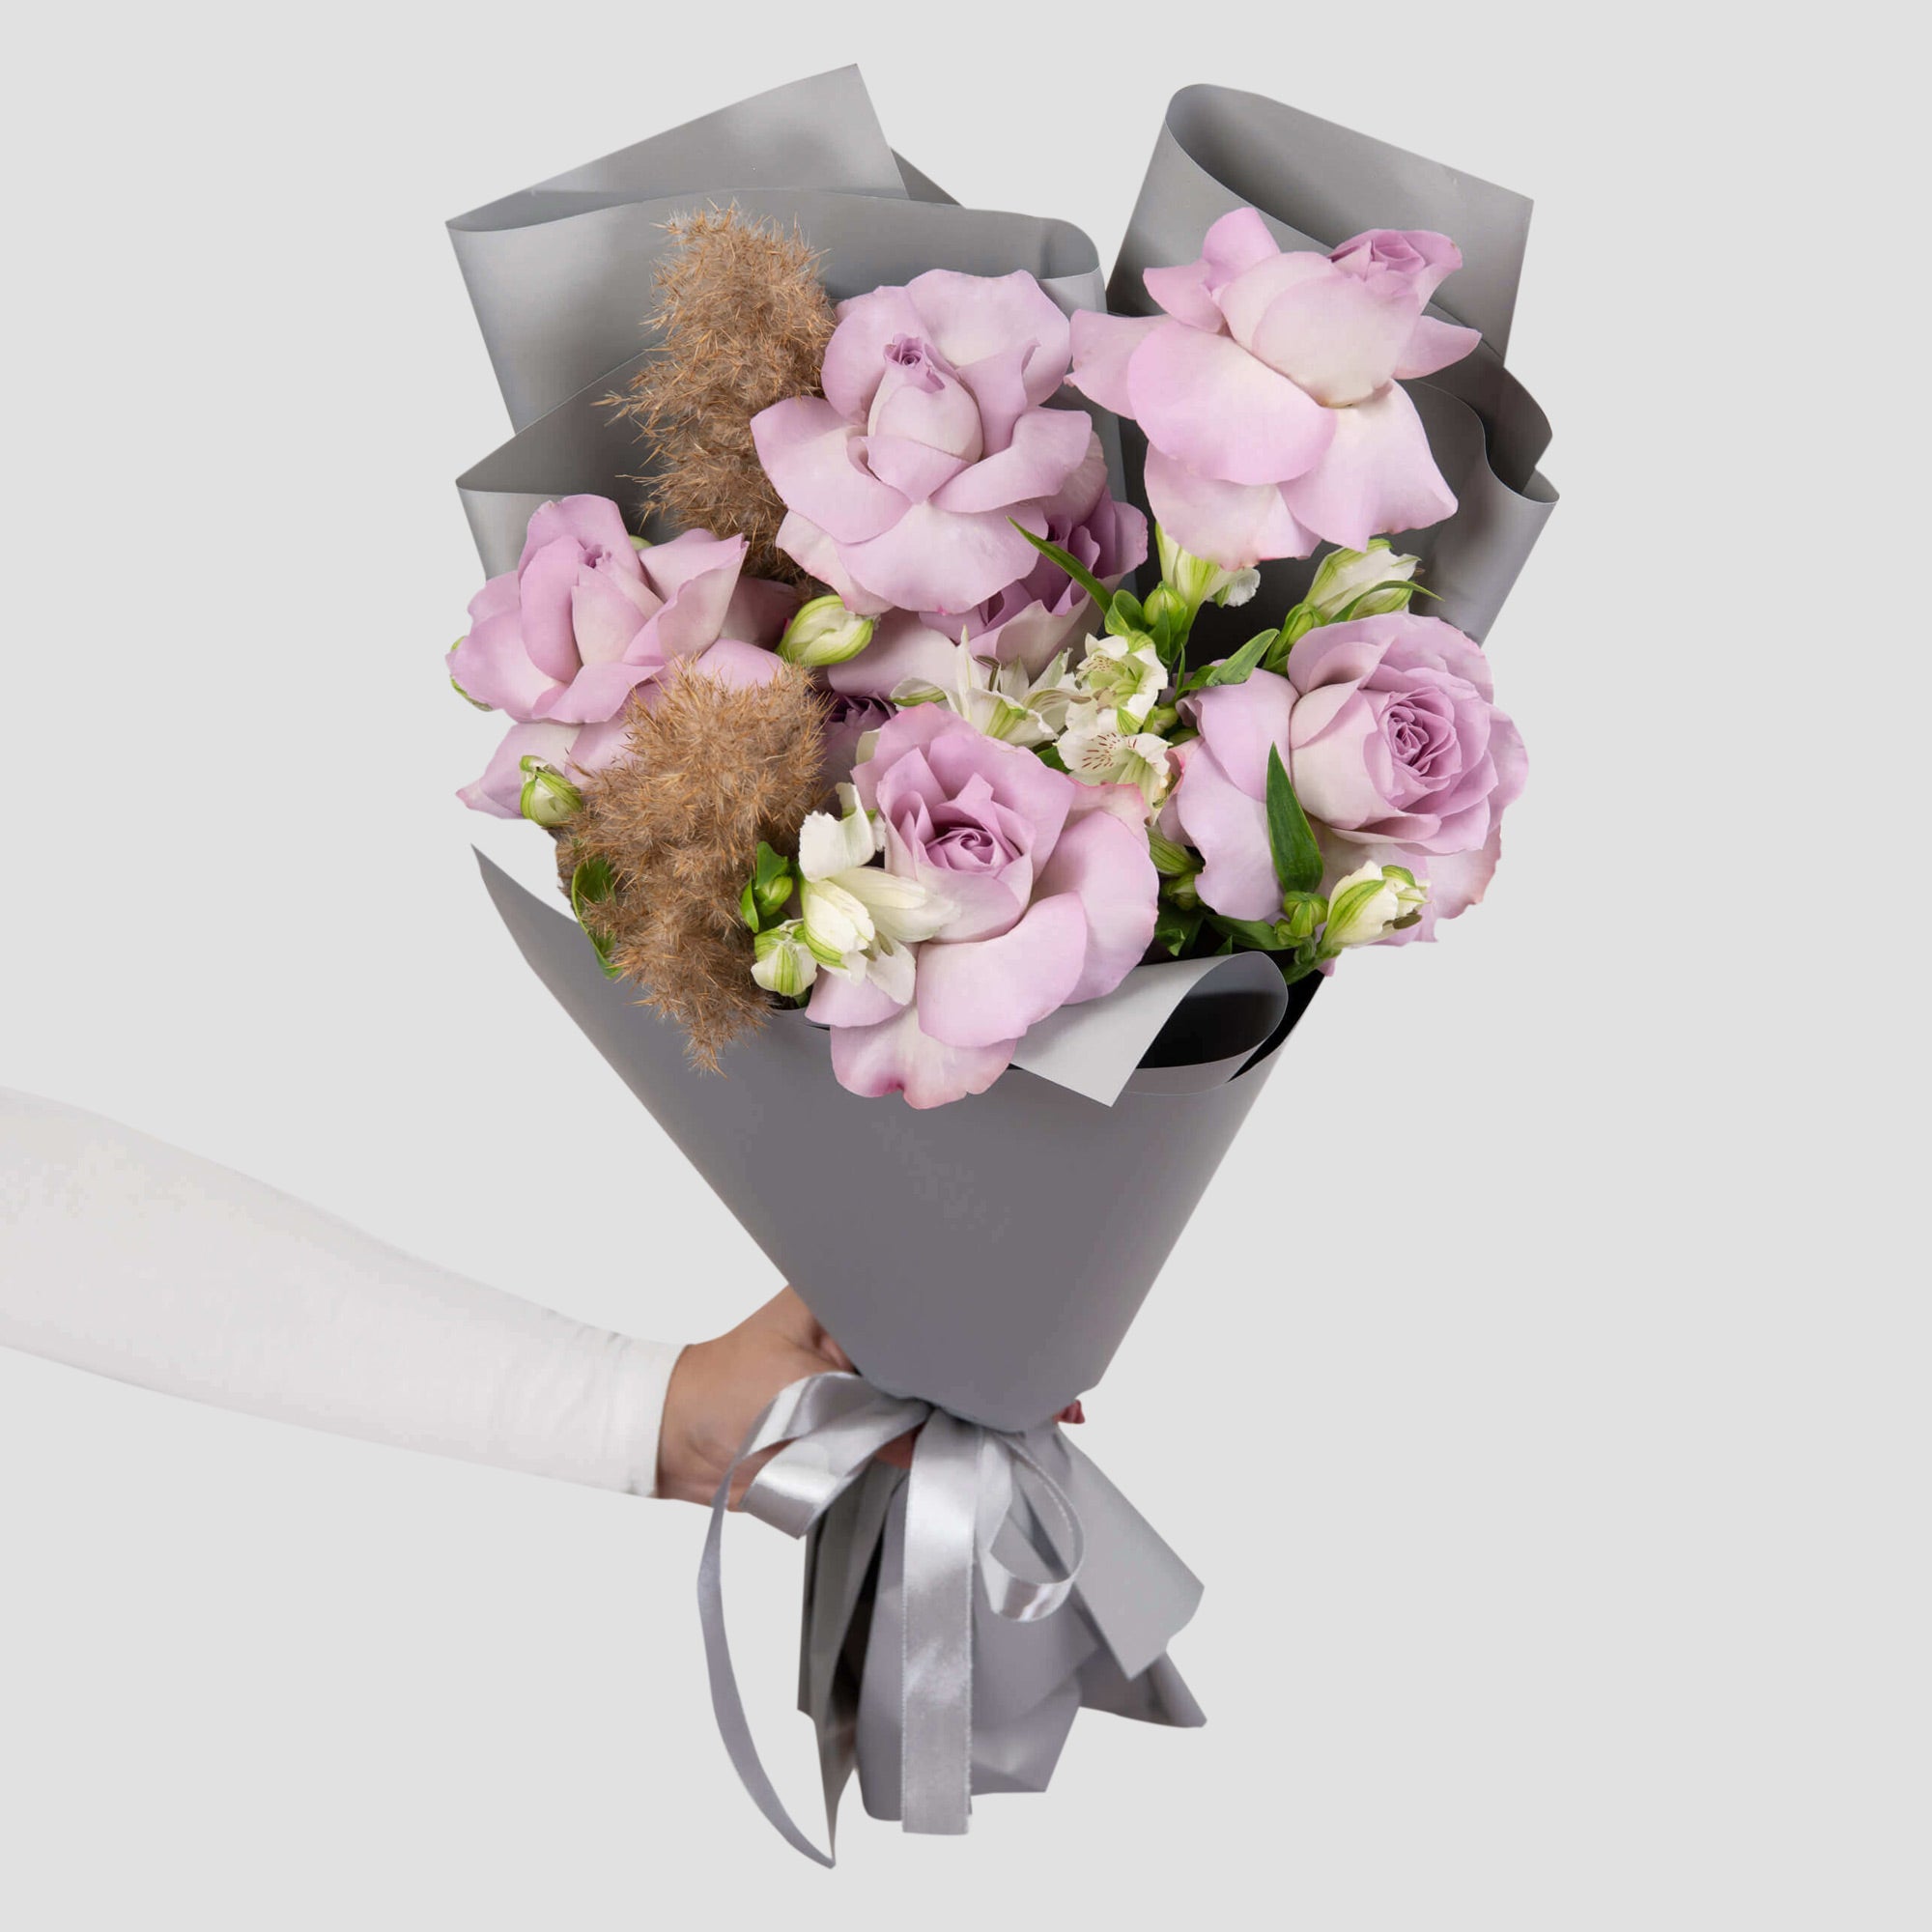 Bouquet with roses and white alstroemeria